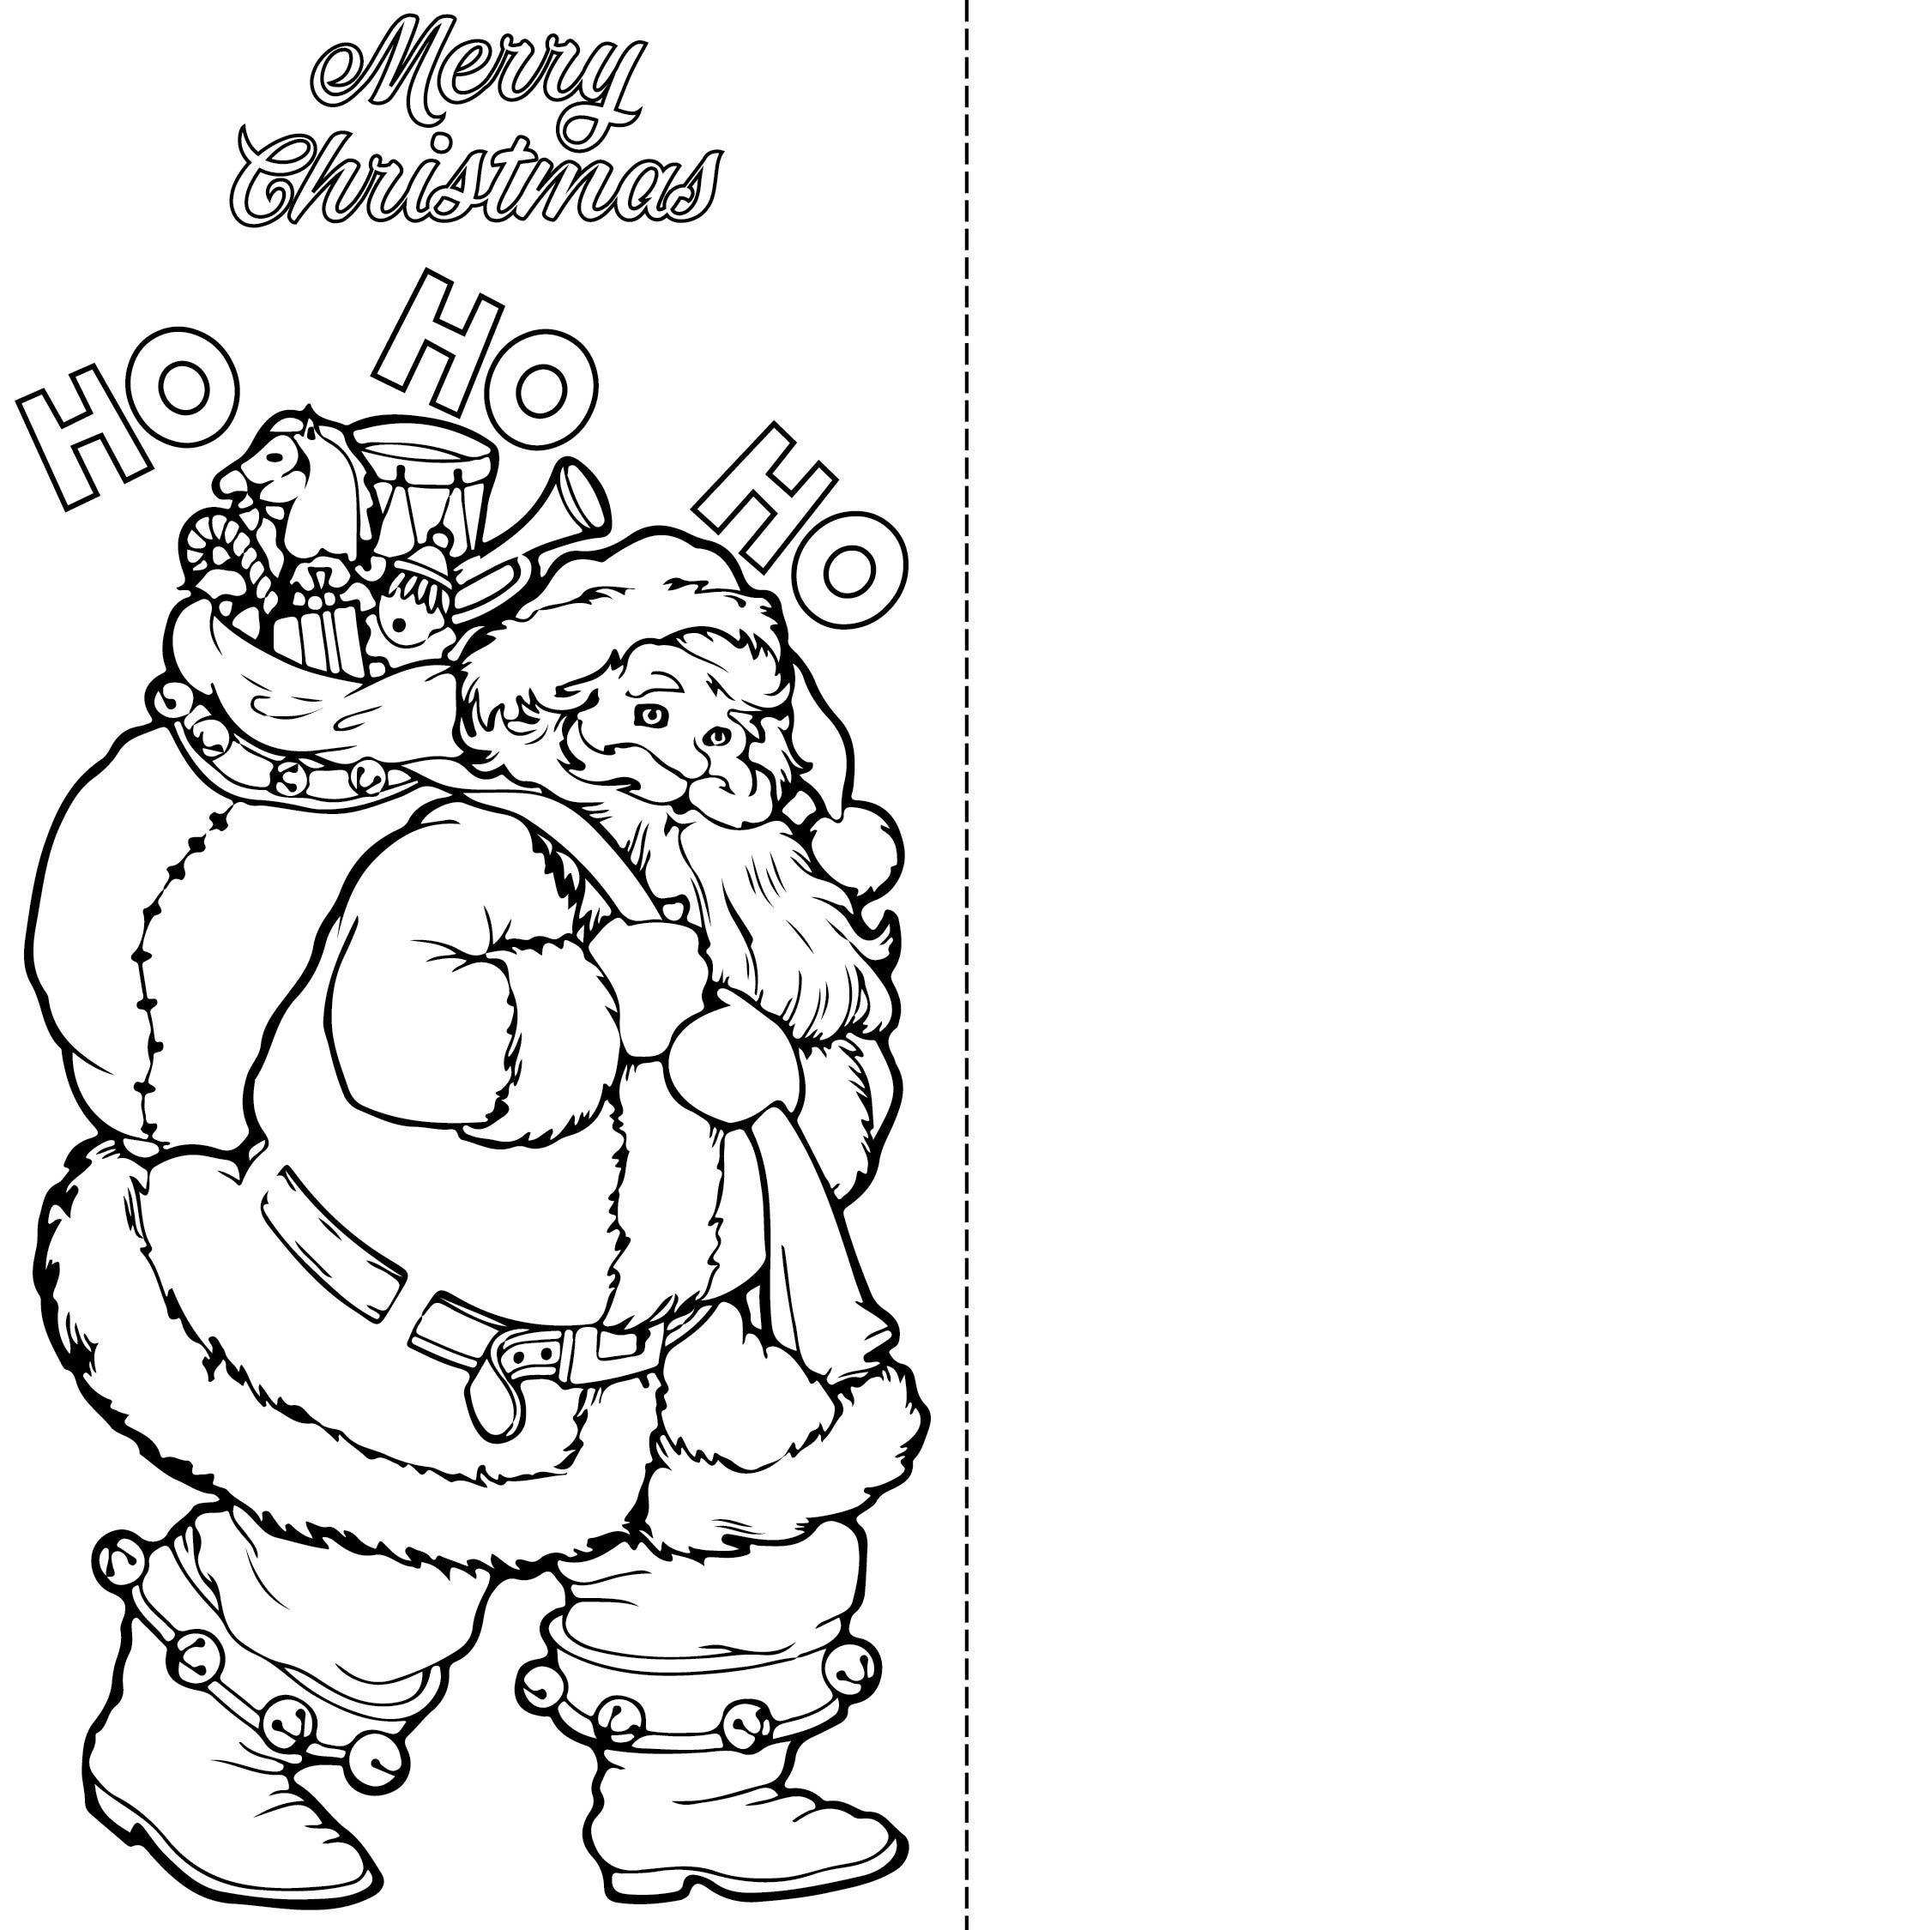 Free Kids Christmas Card Coloring Printables Coloring Pages